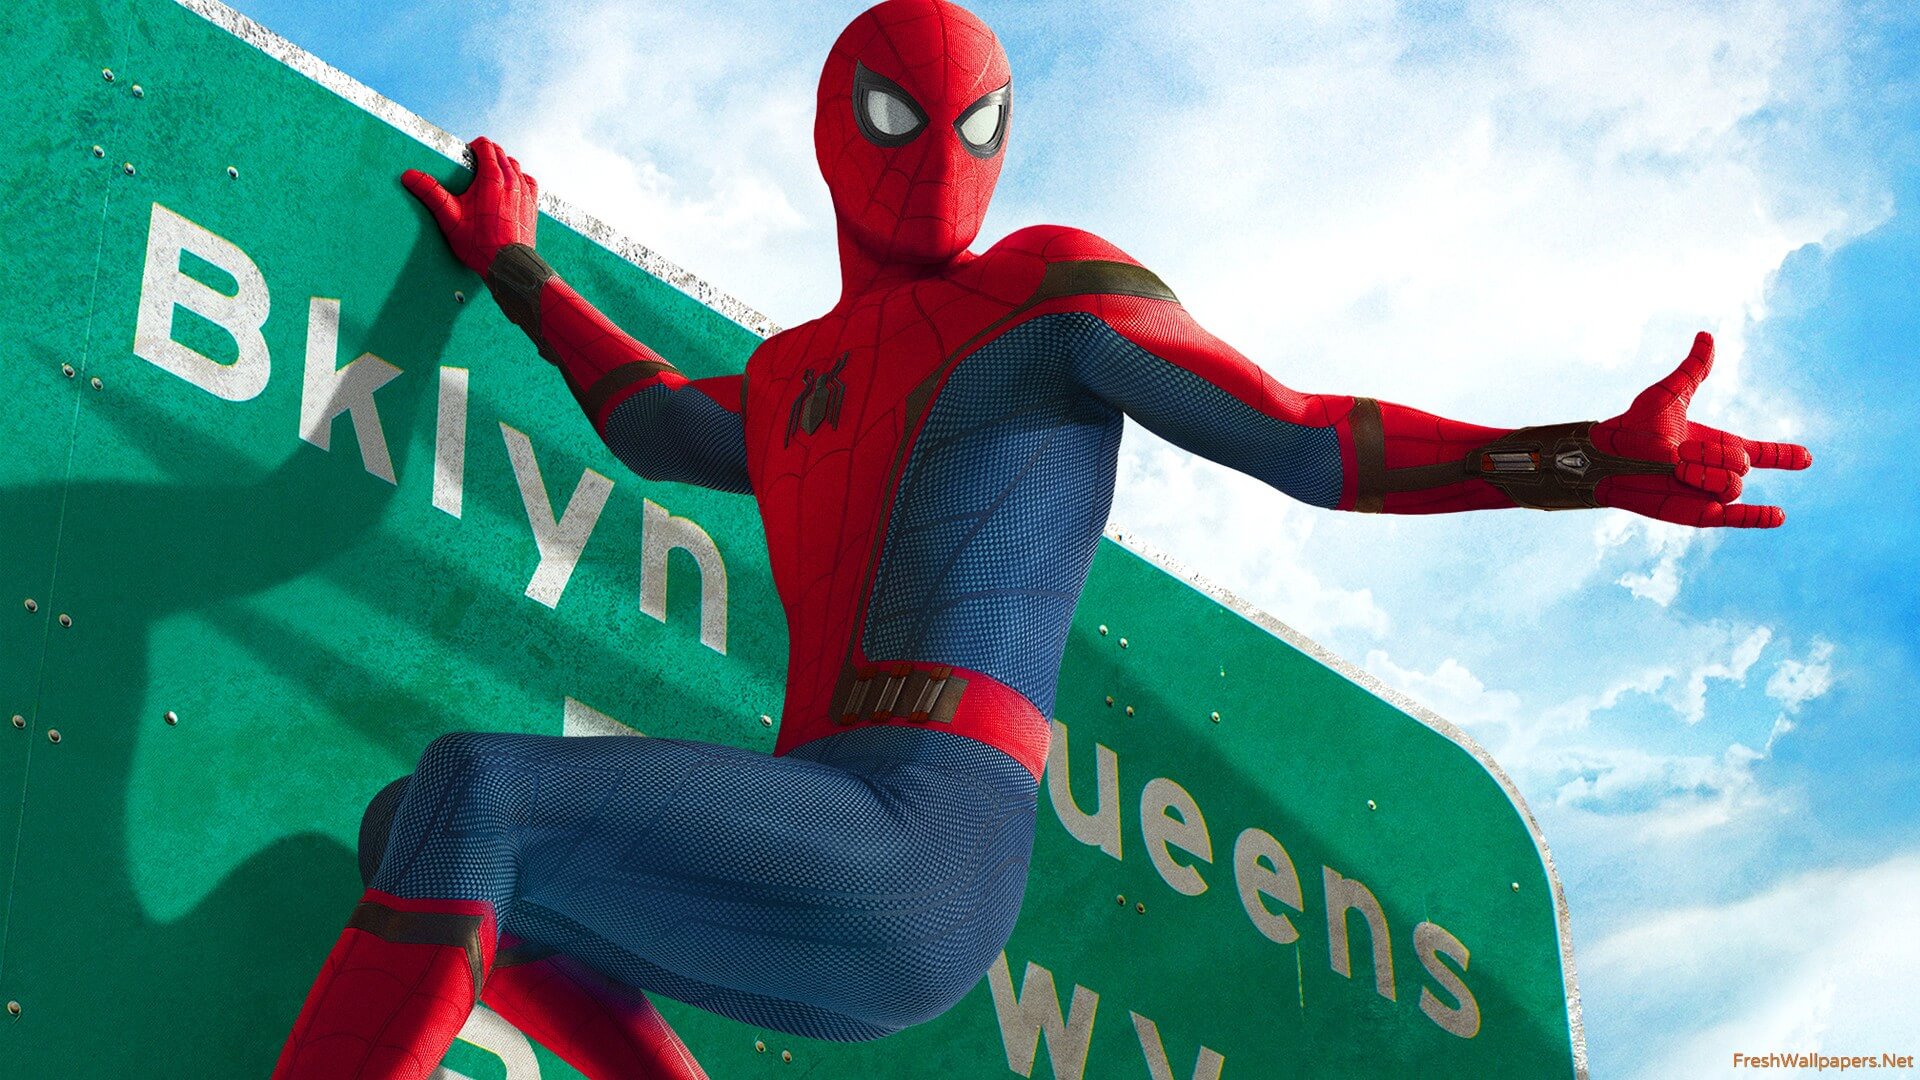 Spider-Man: Far From Home Cinematographe.it